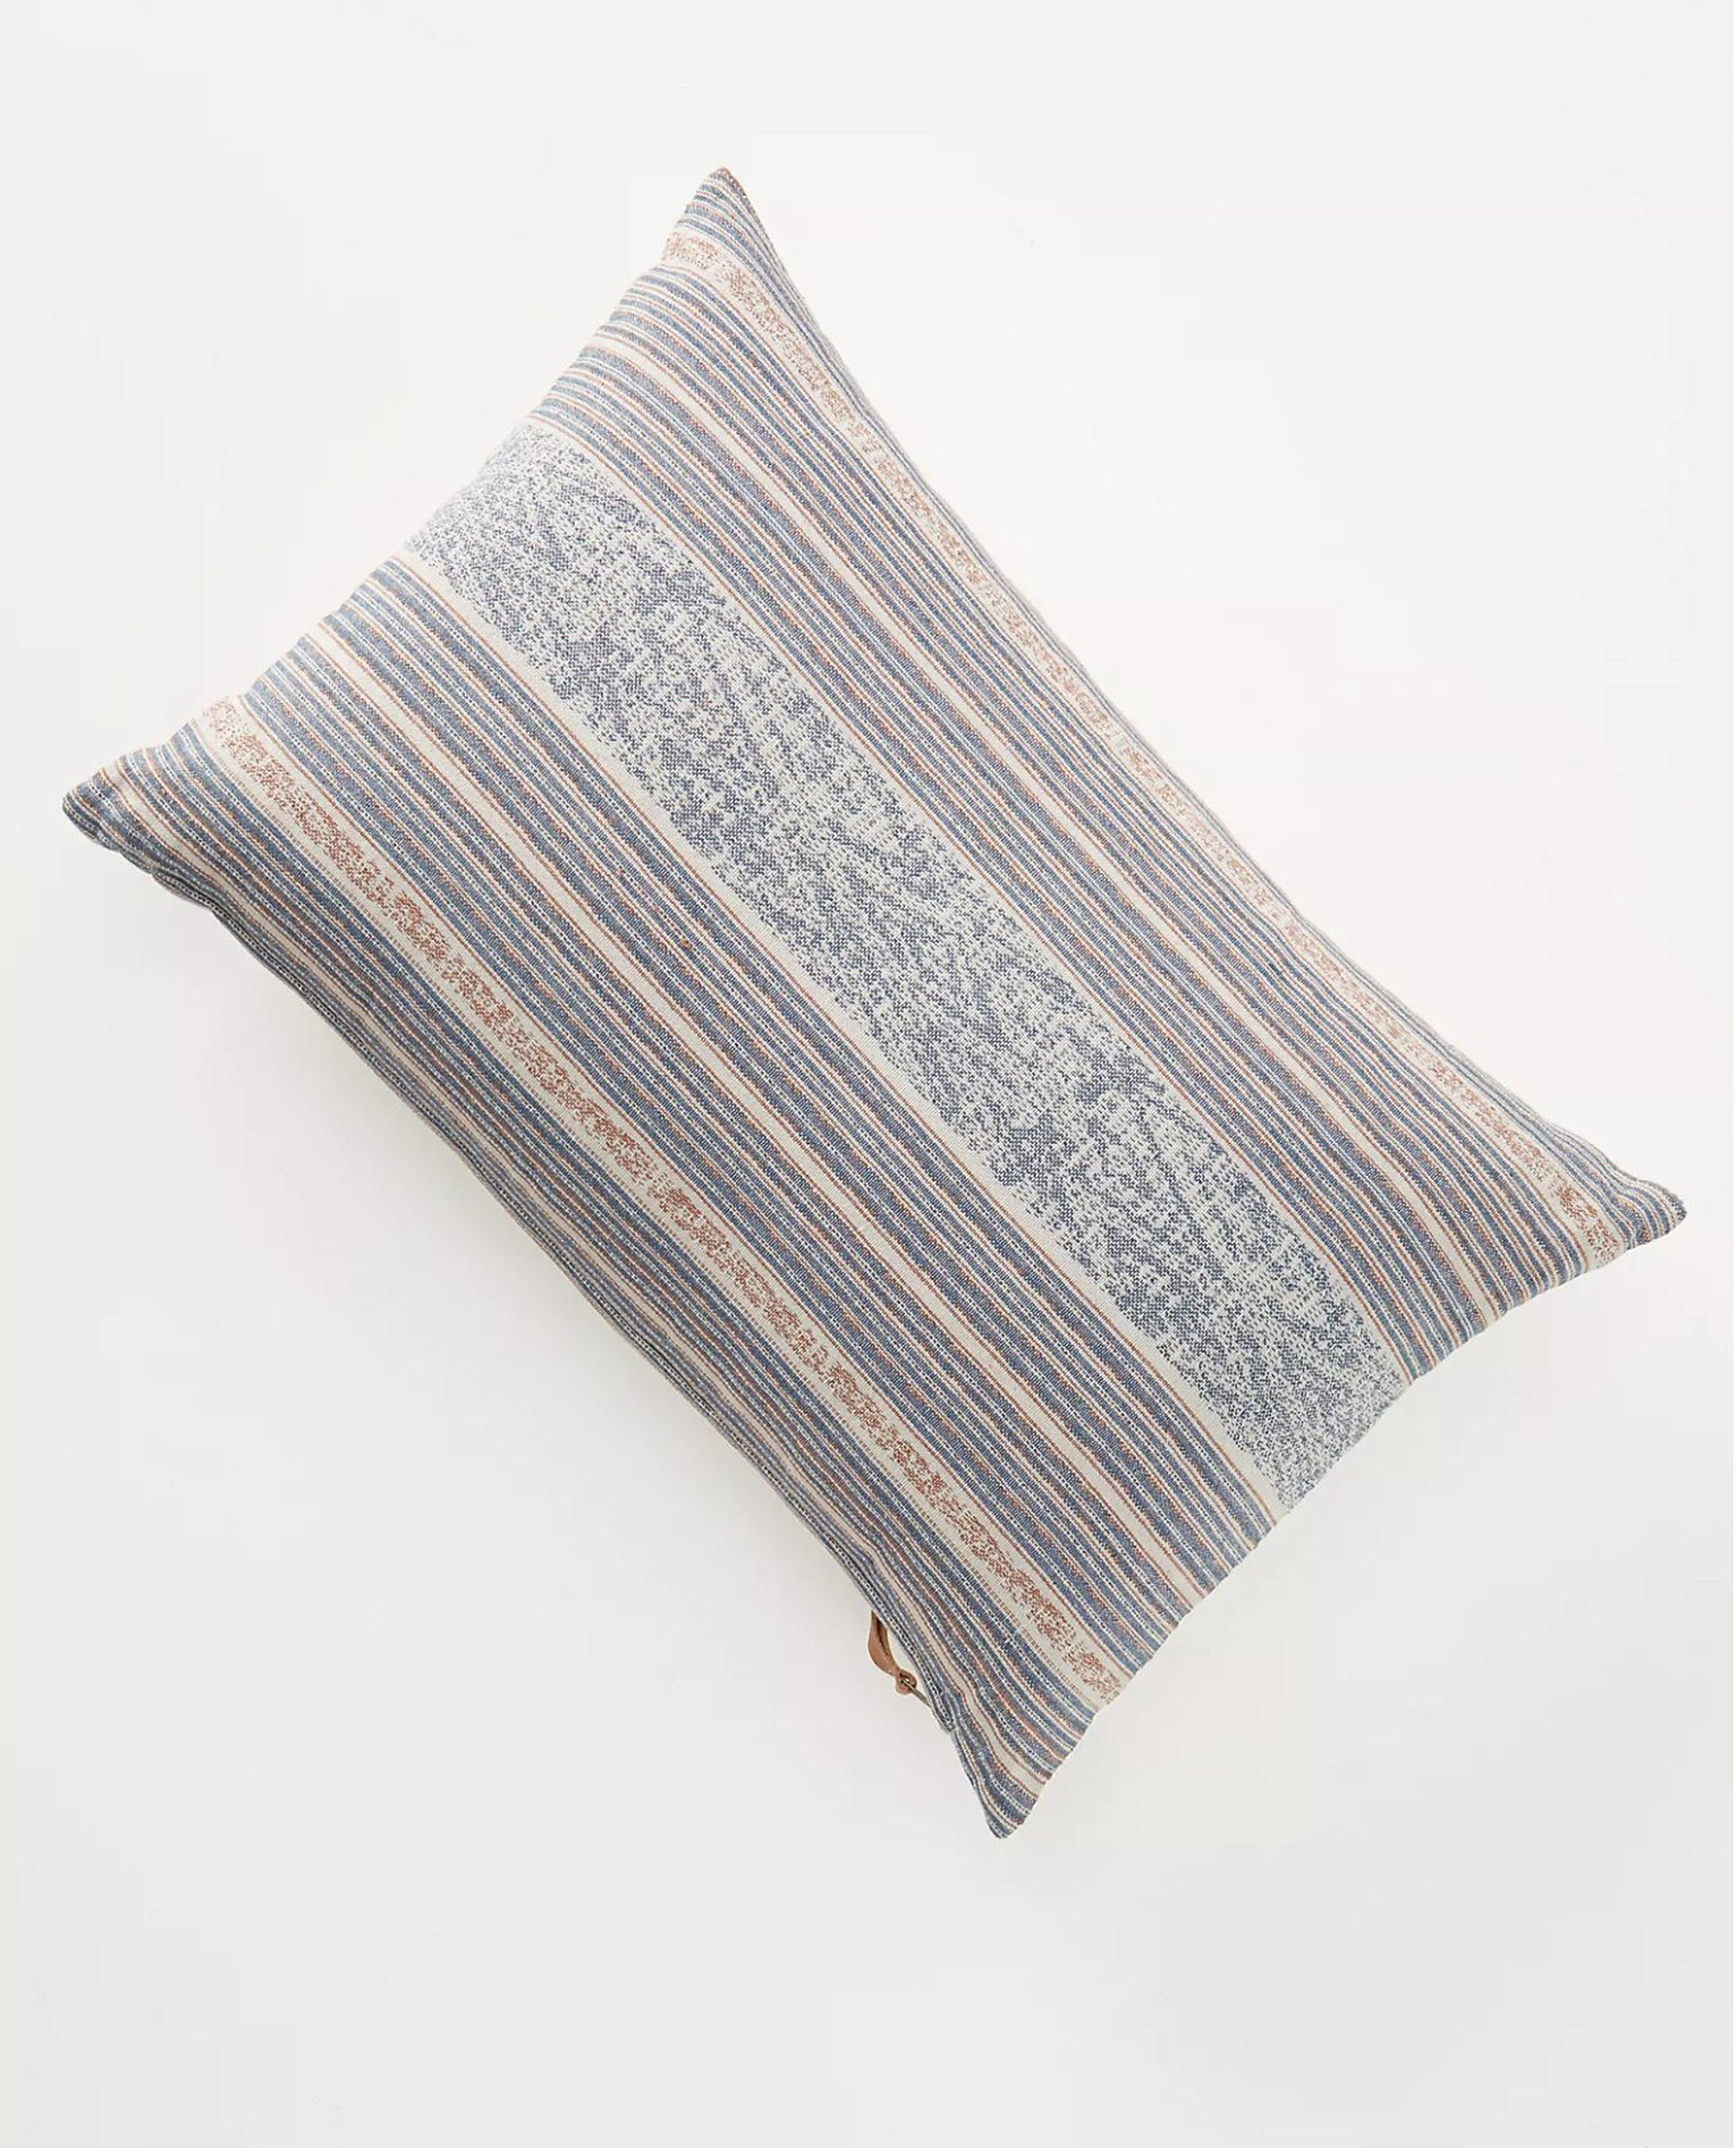 Amber Lewis for Anthropologie Woven Ferndale Pillow - Anthropologie